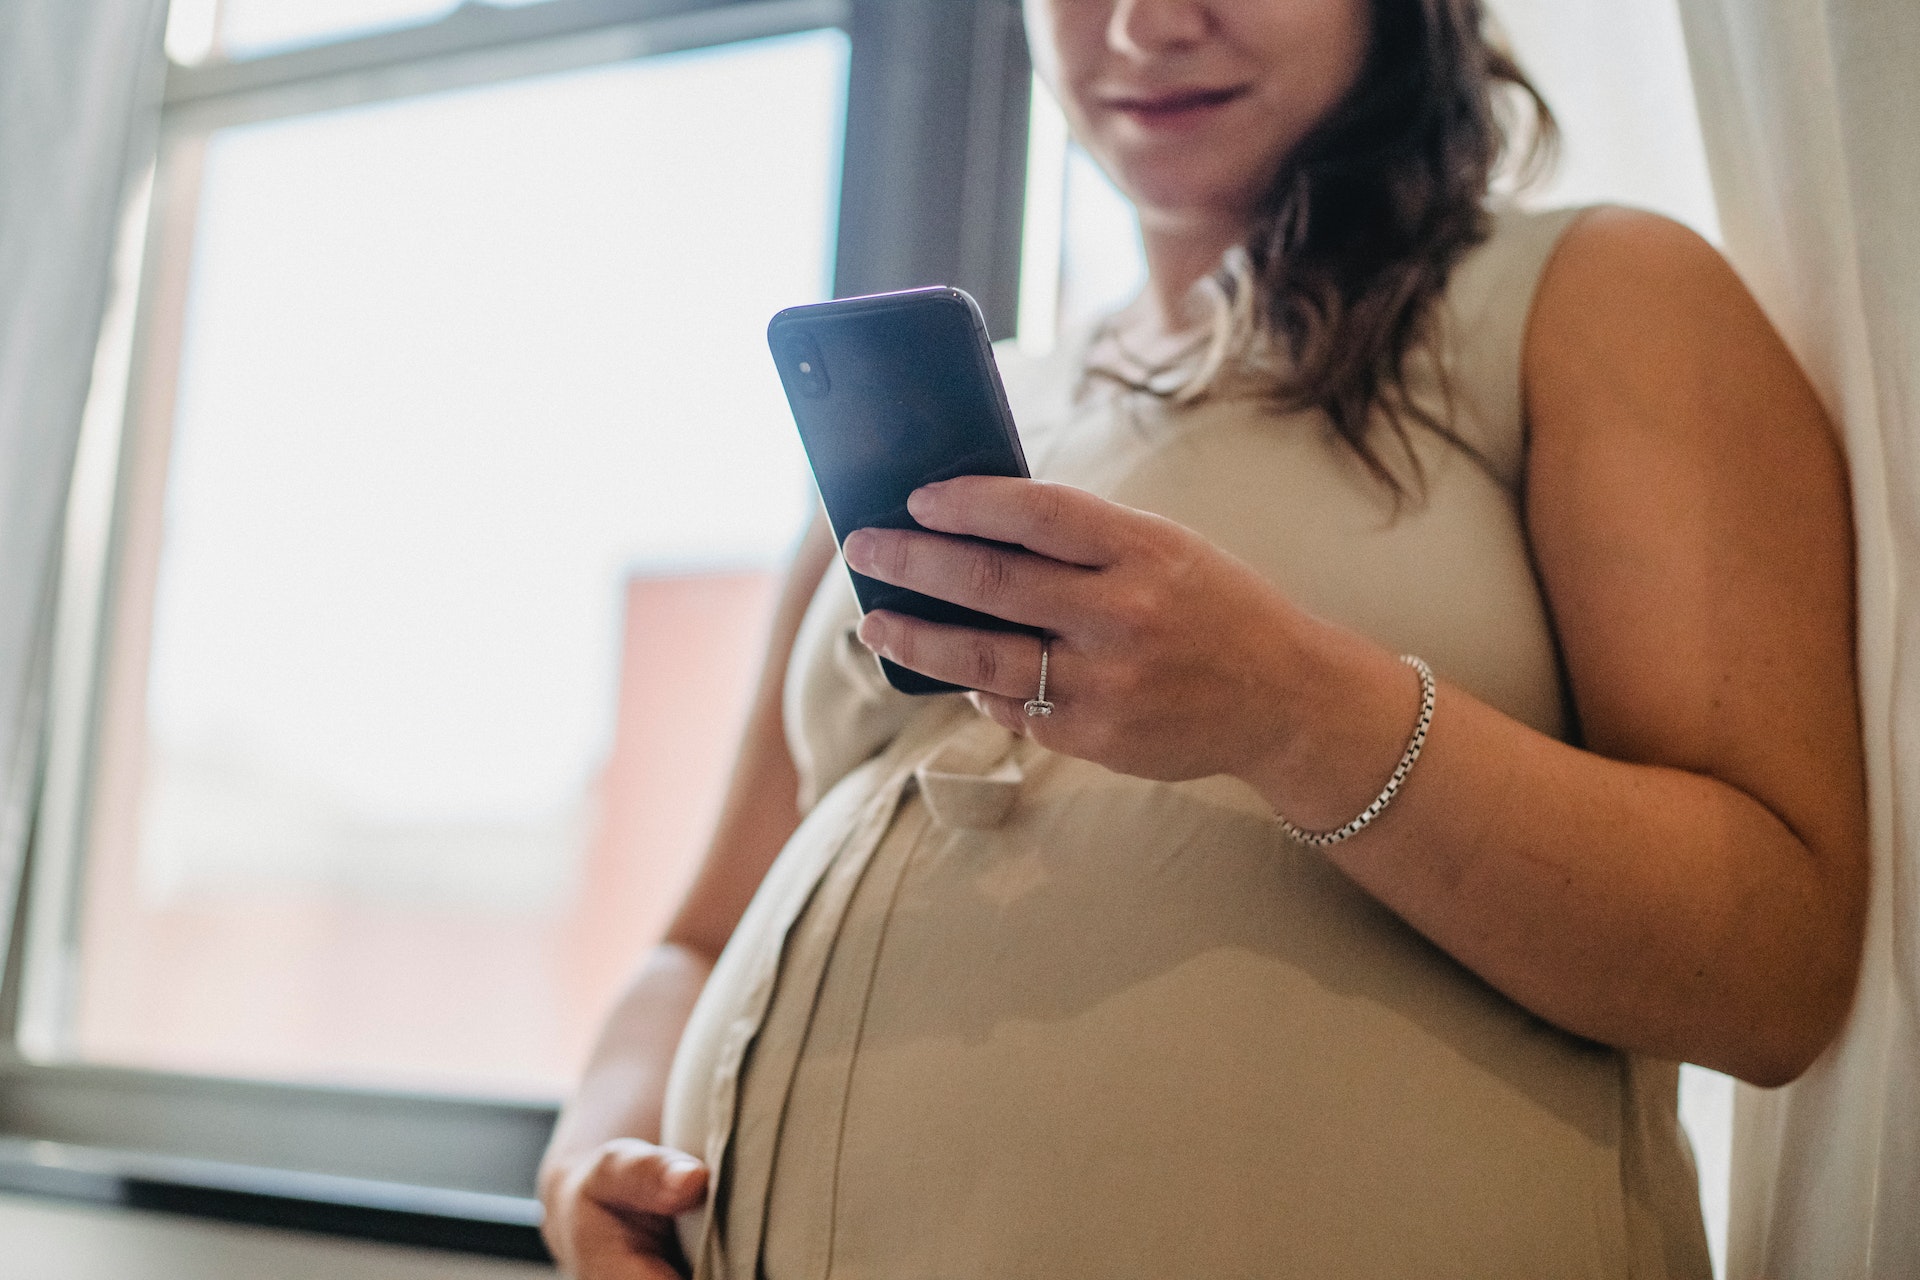 A pregnant woman using her phone | Source: Shutterstock